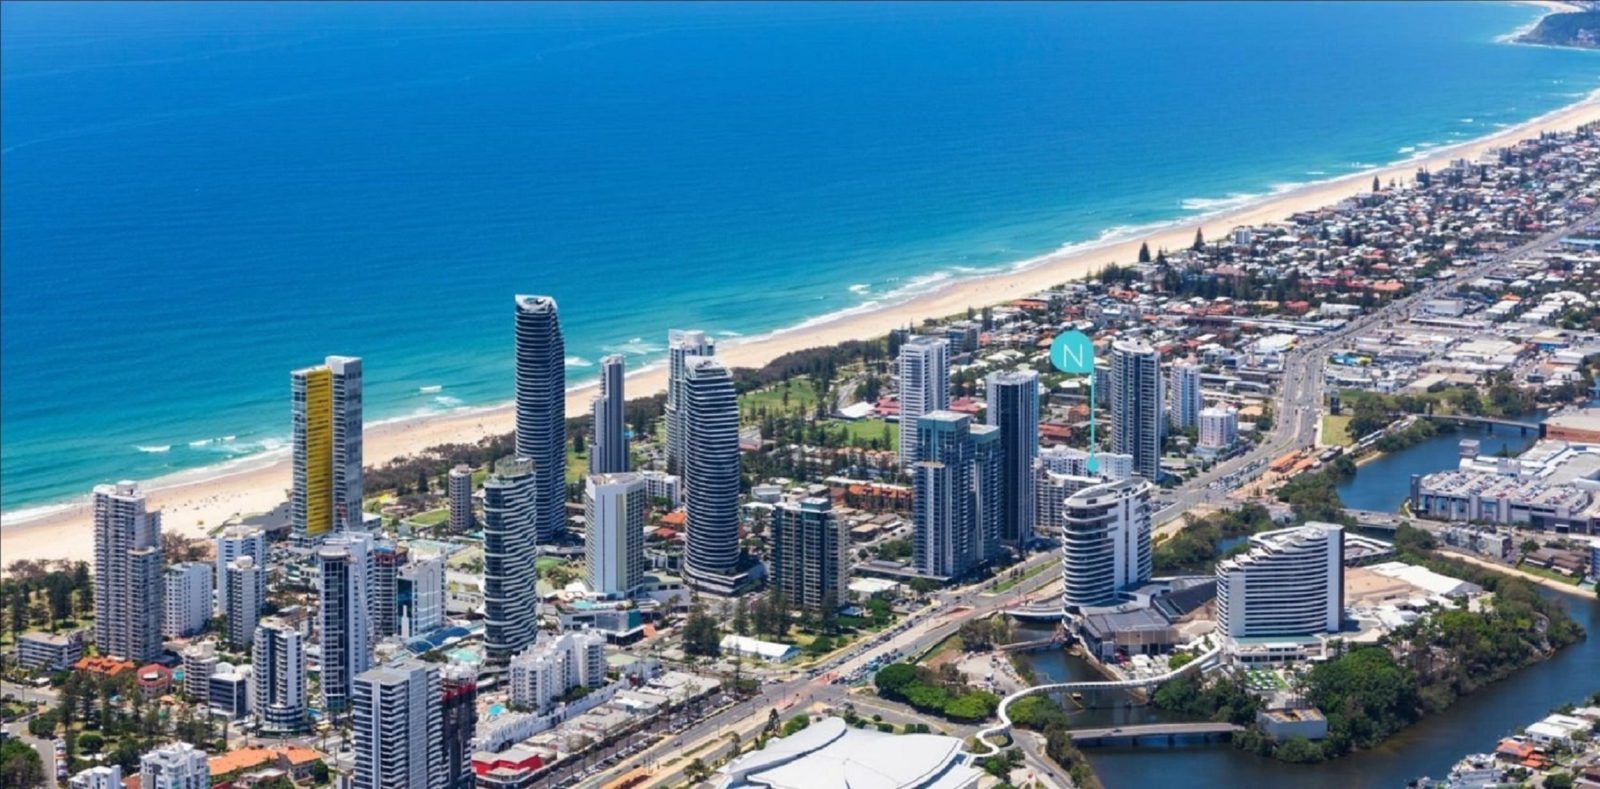 Affordable quality accommodation in Broadbeach